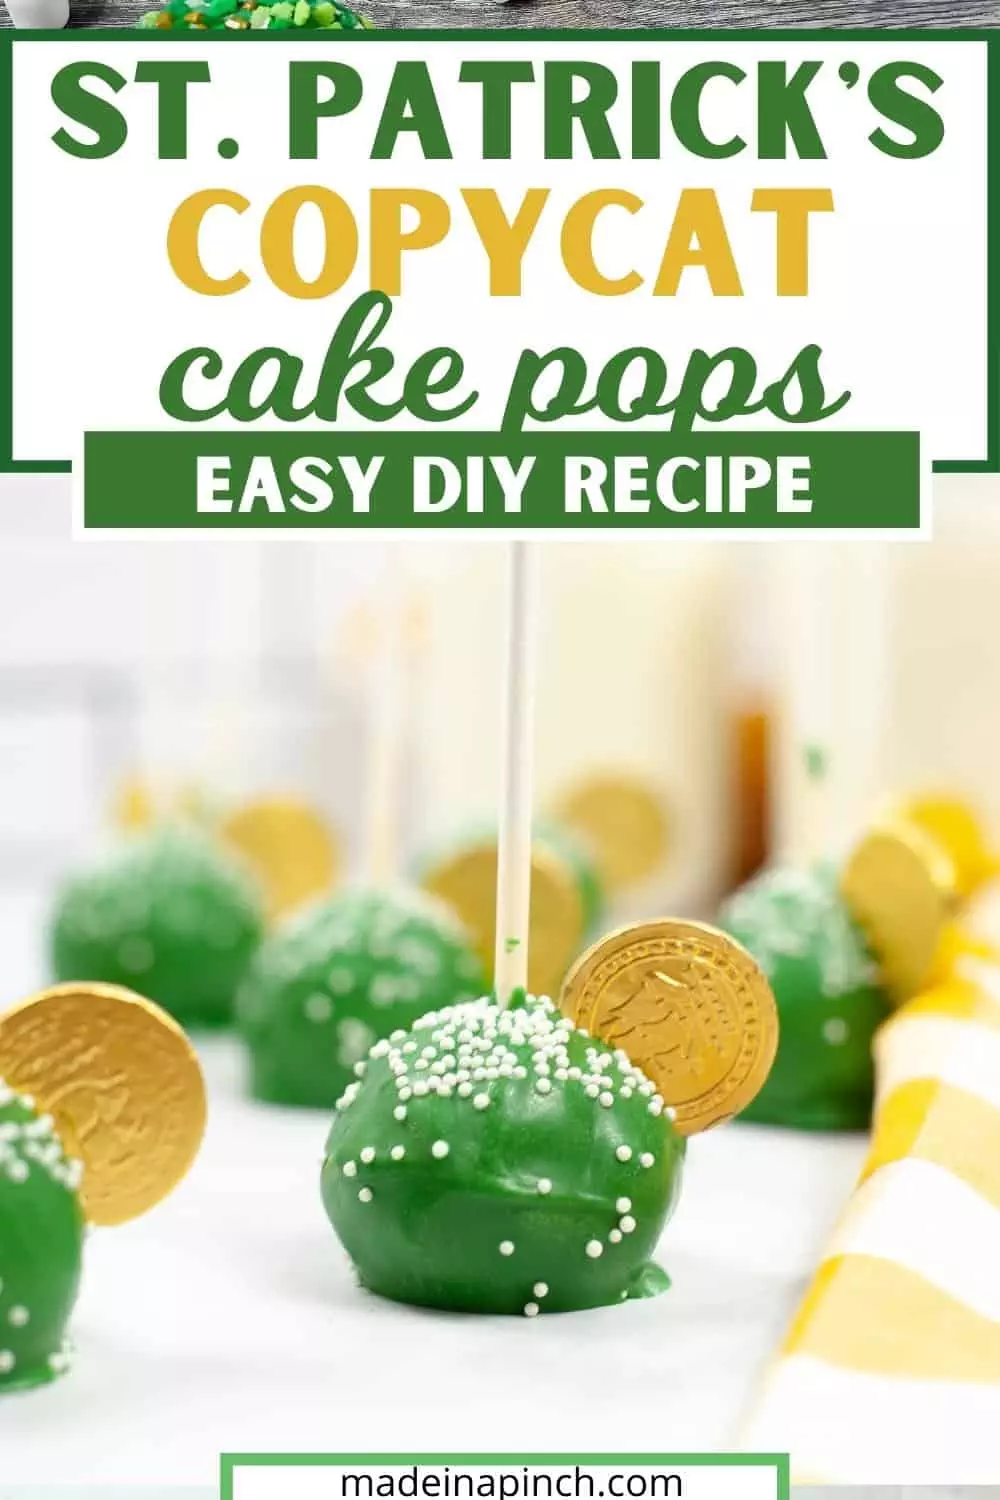 These beautiful green copycat Starbucks cake pops are the perfect St. Patrick